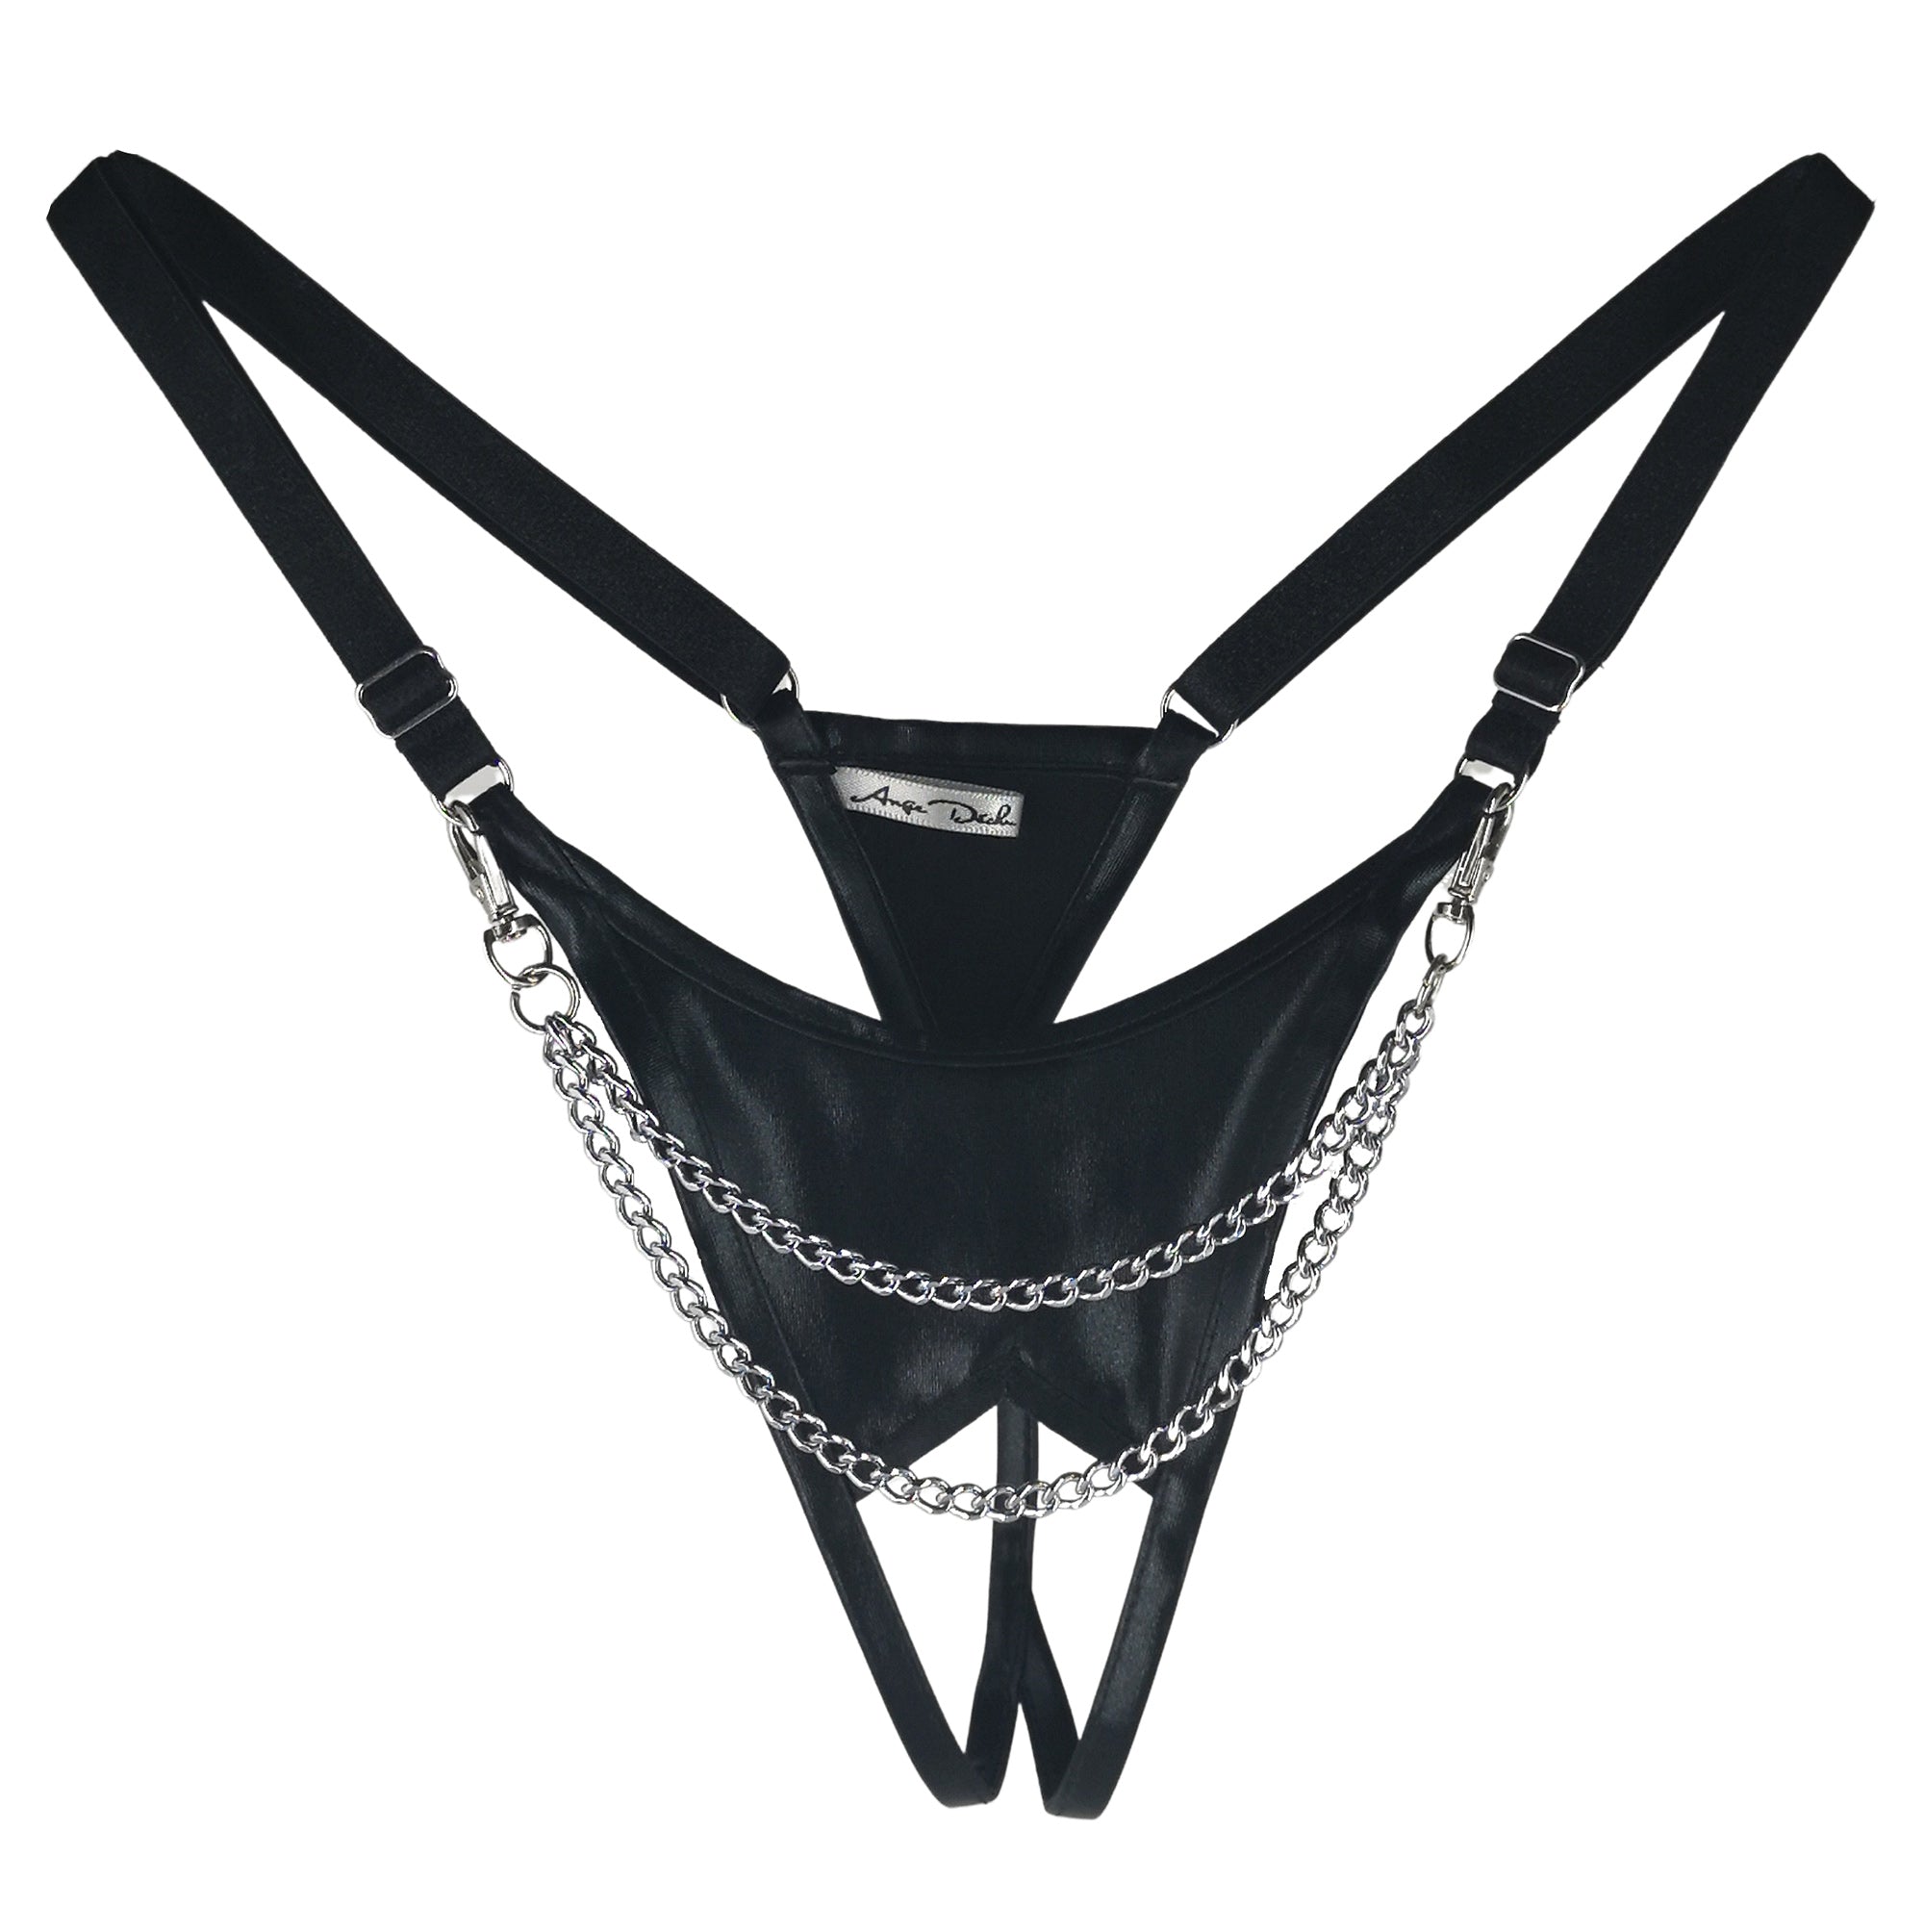 Crotchless open panties sexy lingerie gift for her thong g string open crotch black wet look & chains - Ange Déchu